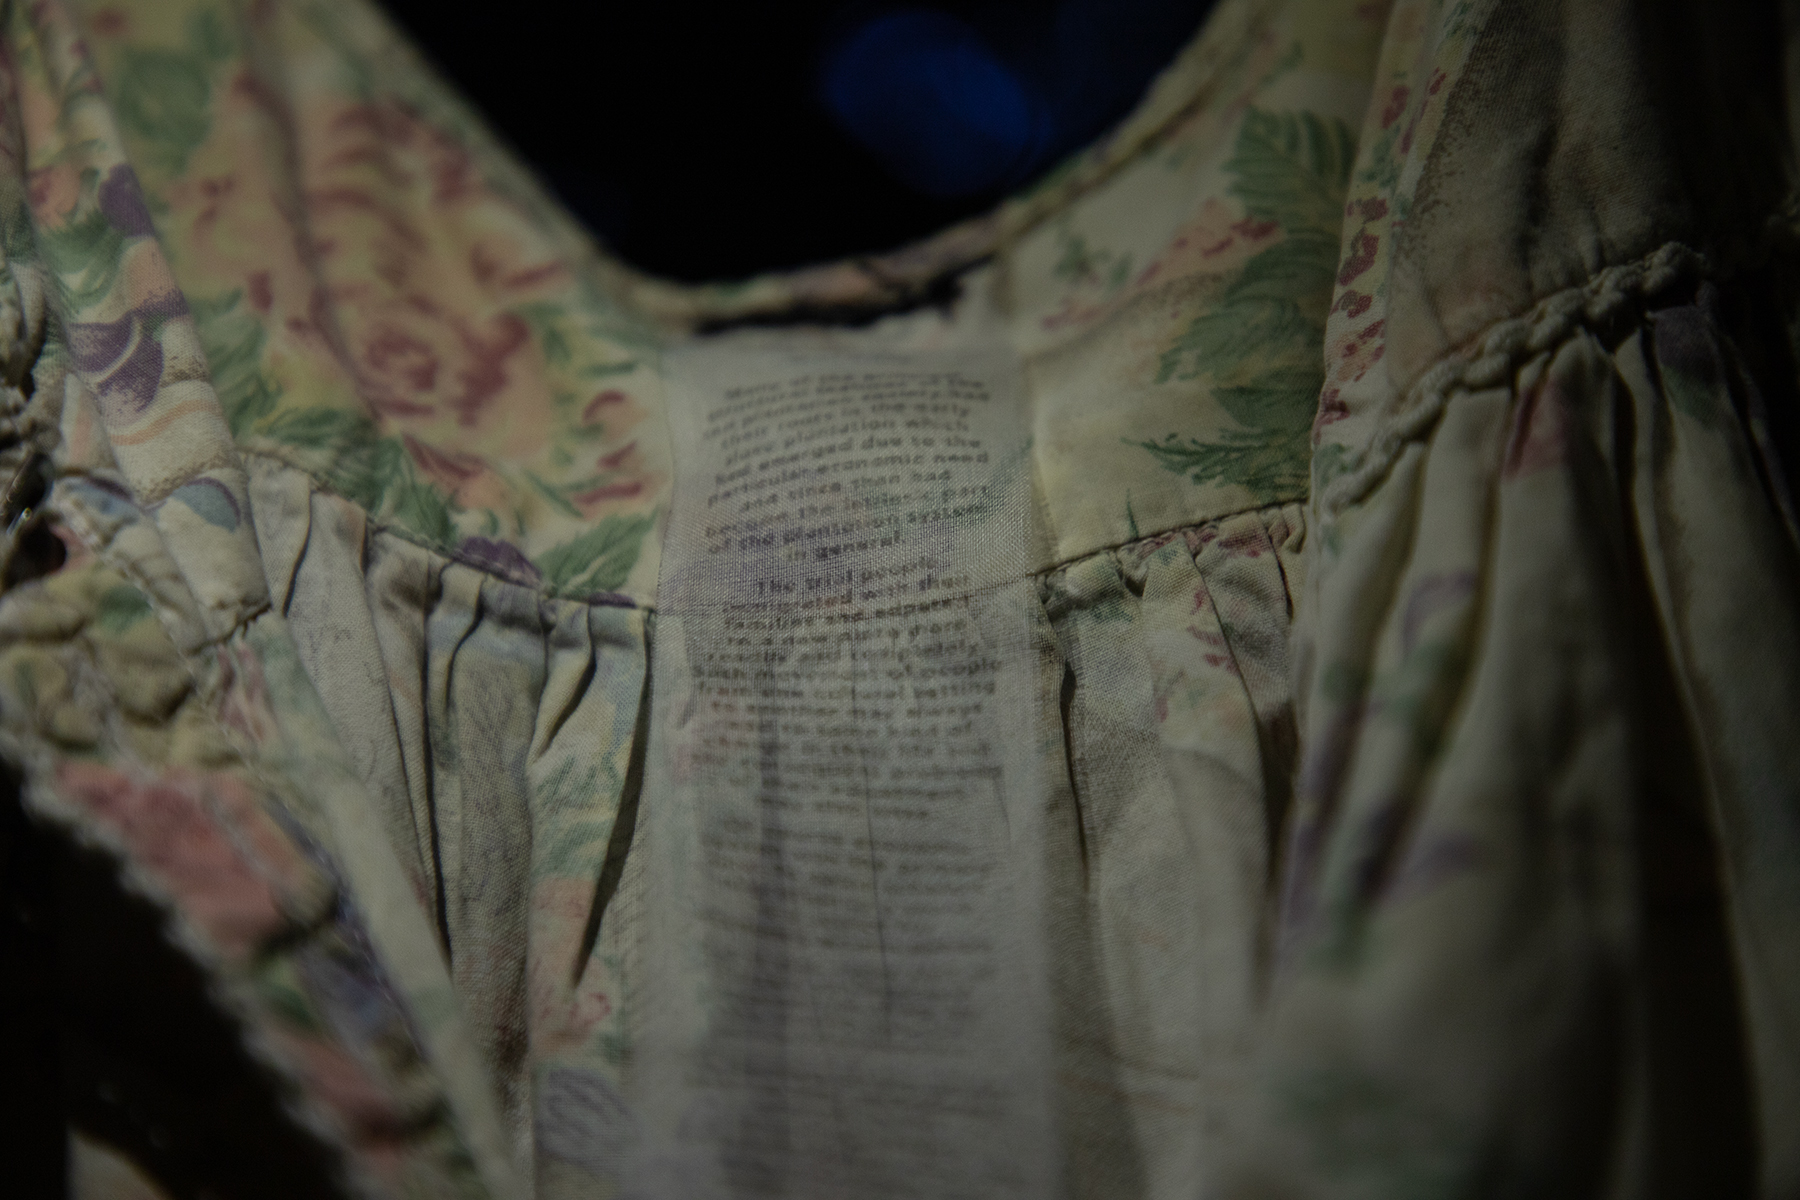 a transparent care label is visibly stitched into a faded floral dress